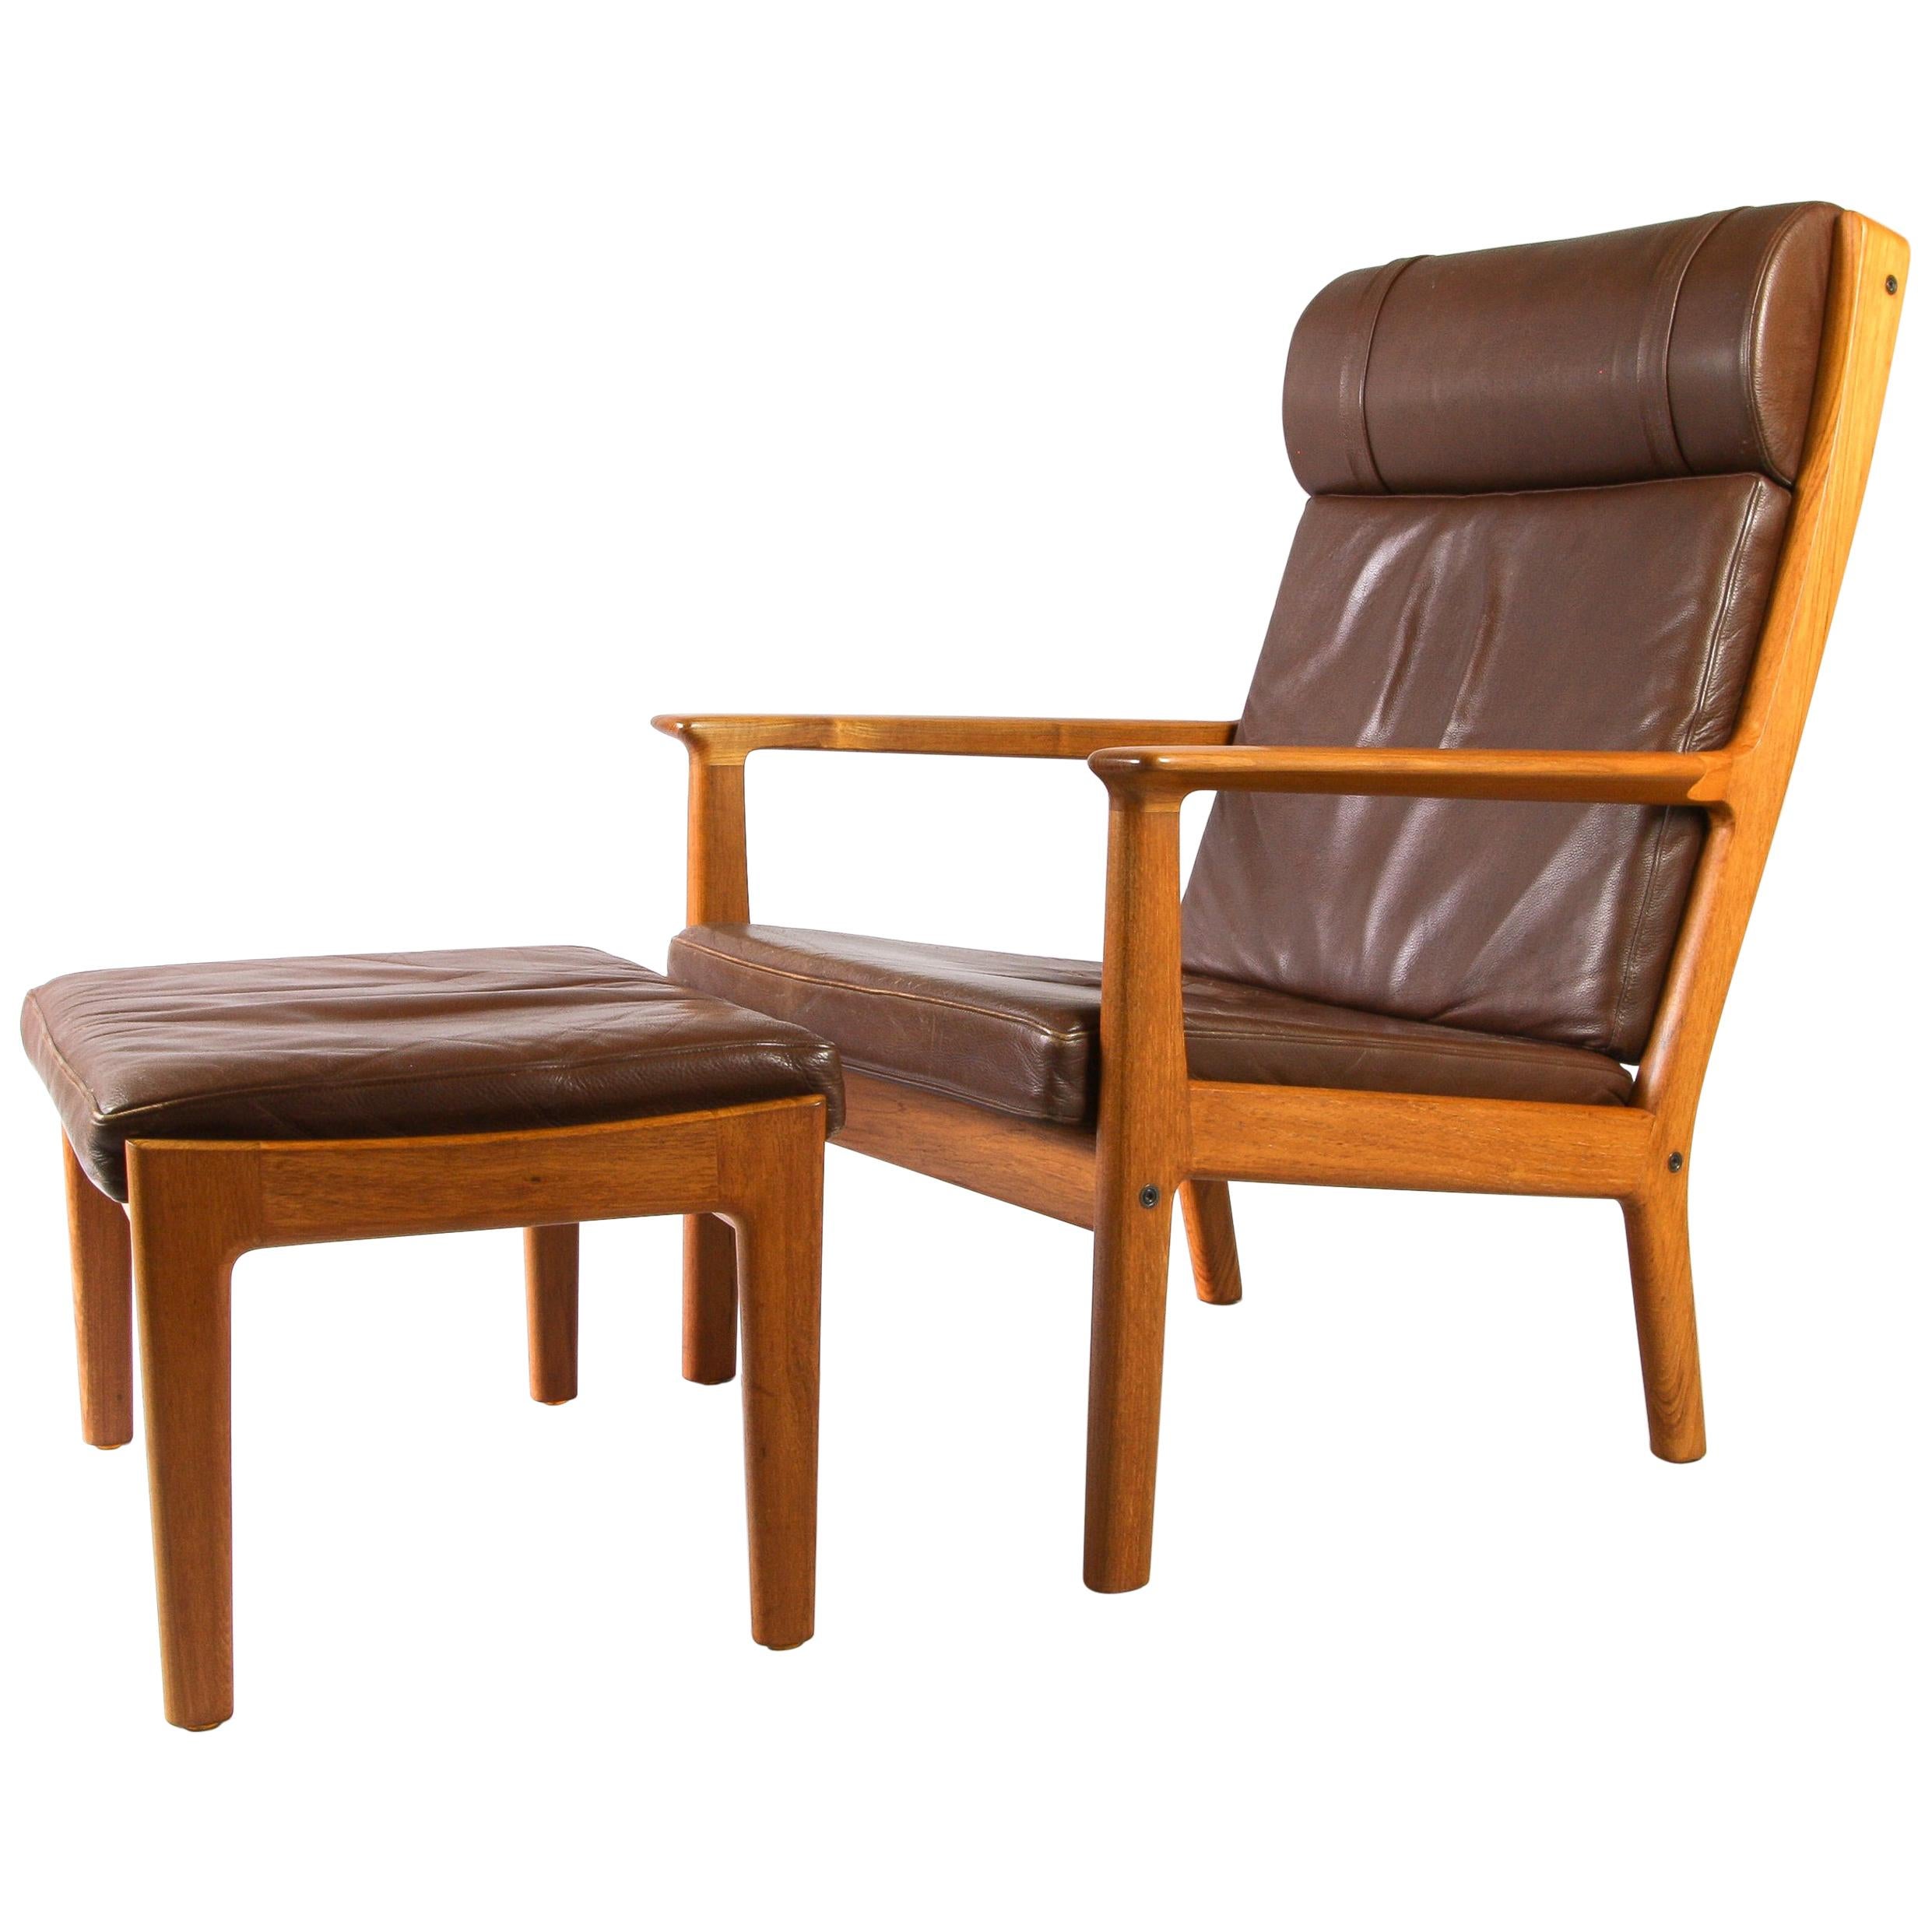 Leather and Solid Ash Mid Century Armchair and Foot Stool, Hans Wegner, Denmark,